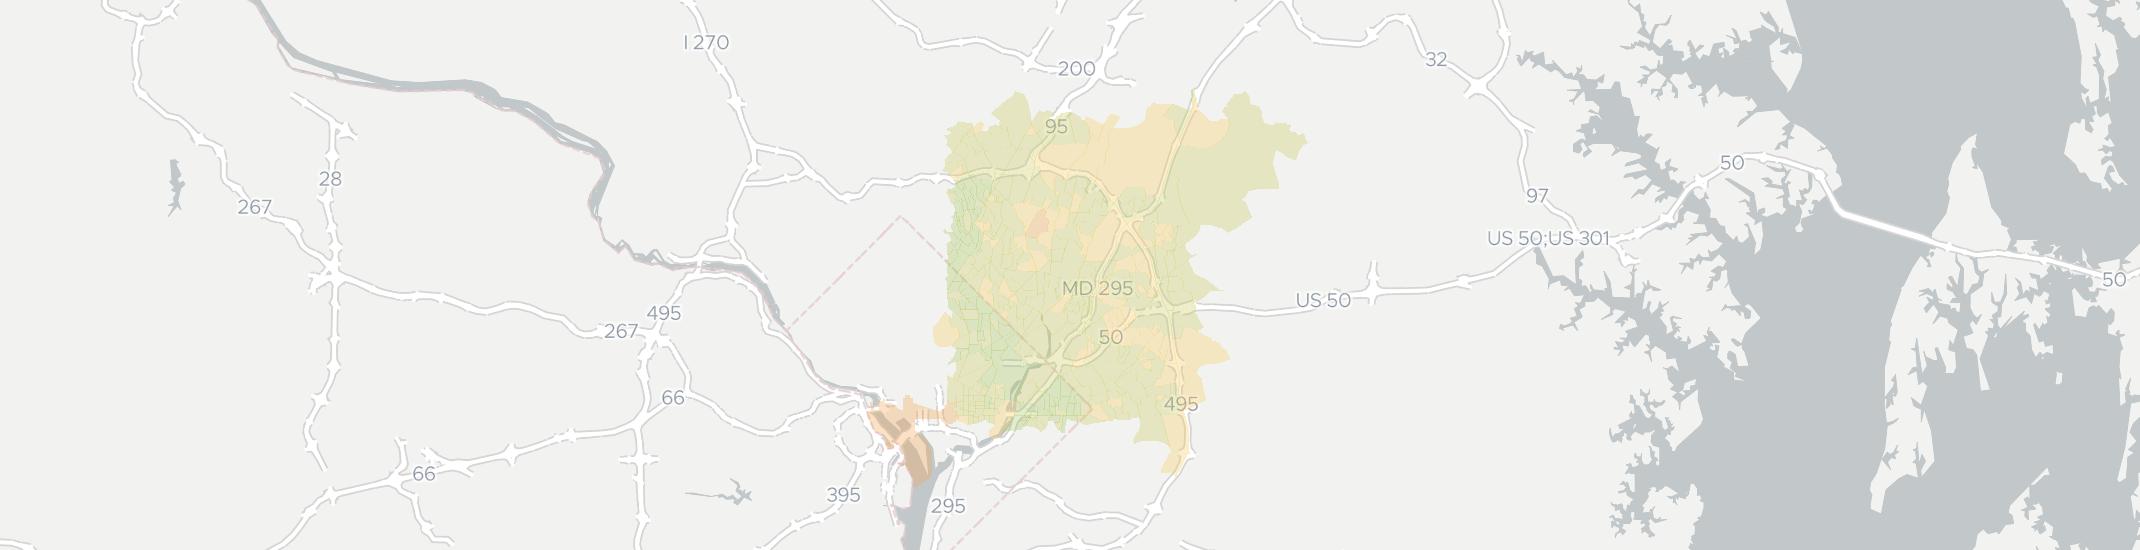 Hyattsville Internet Competition Map. Click for interactive map.